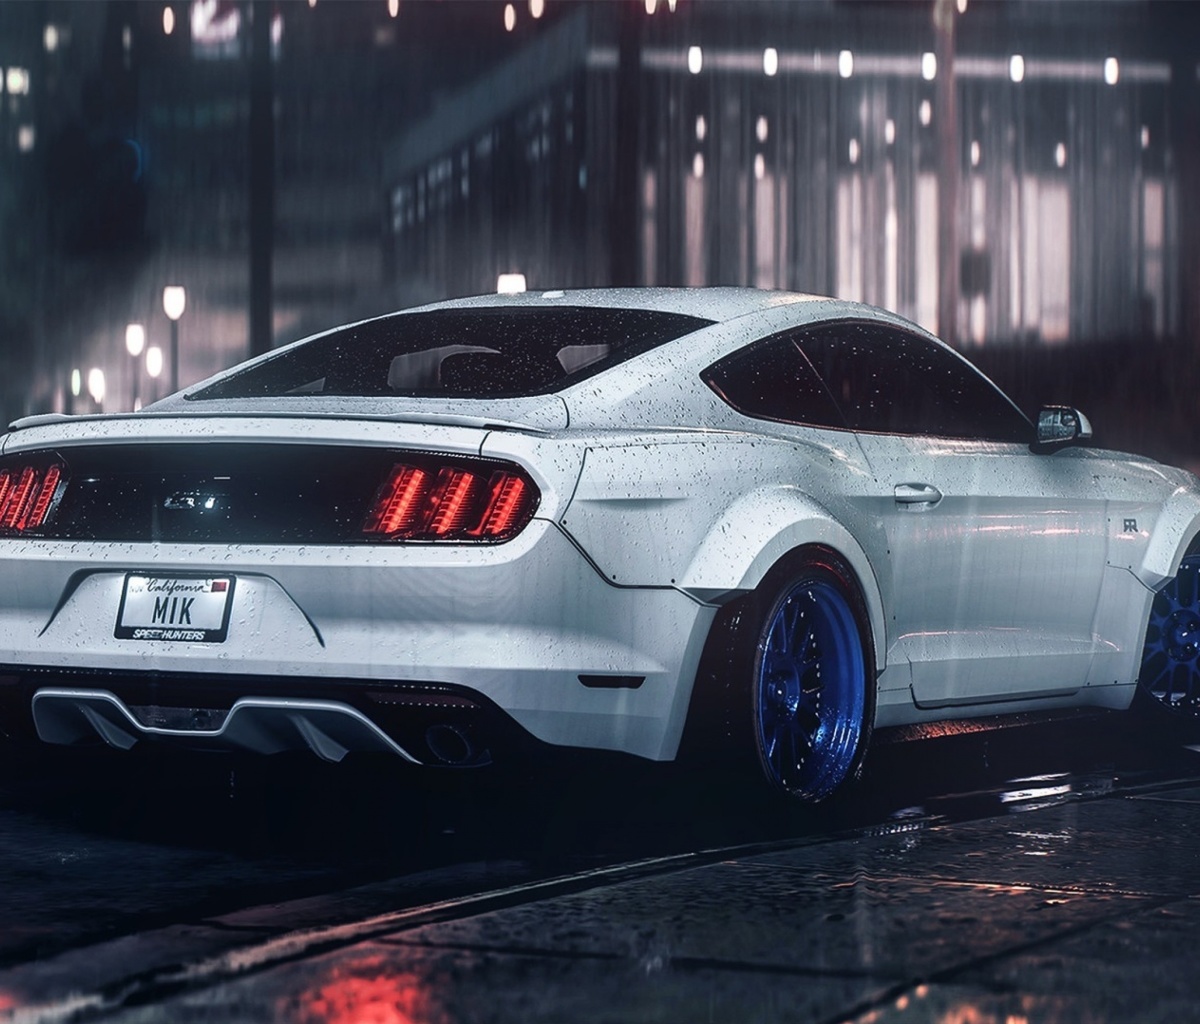 Ford Mustang Shelby GT350 wallpaper 1200x1024